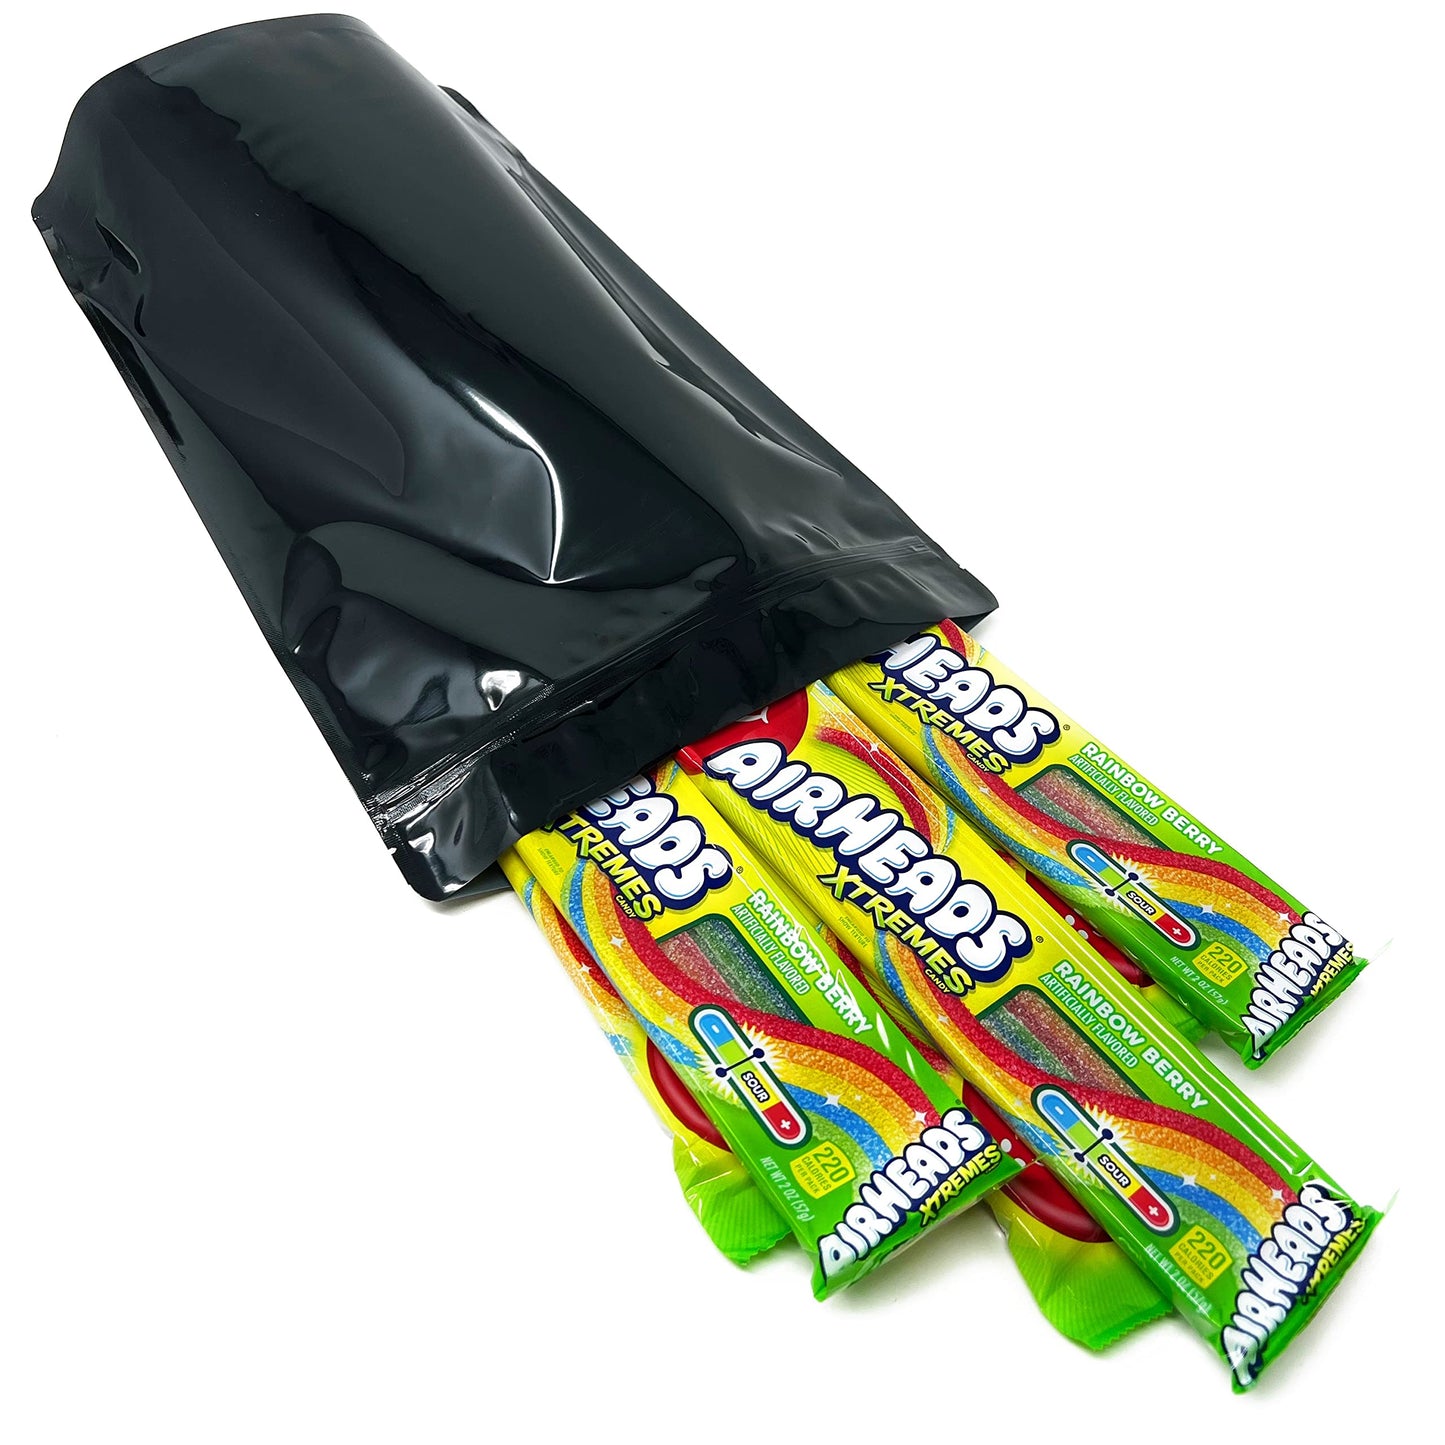 Airheads Xtremes Sour Candy Assortment - 6 Count